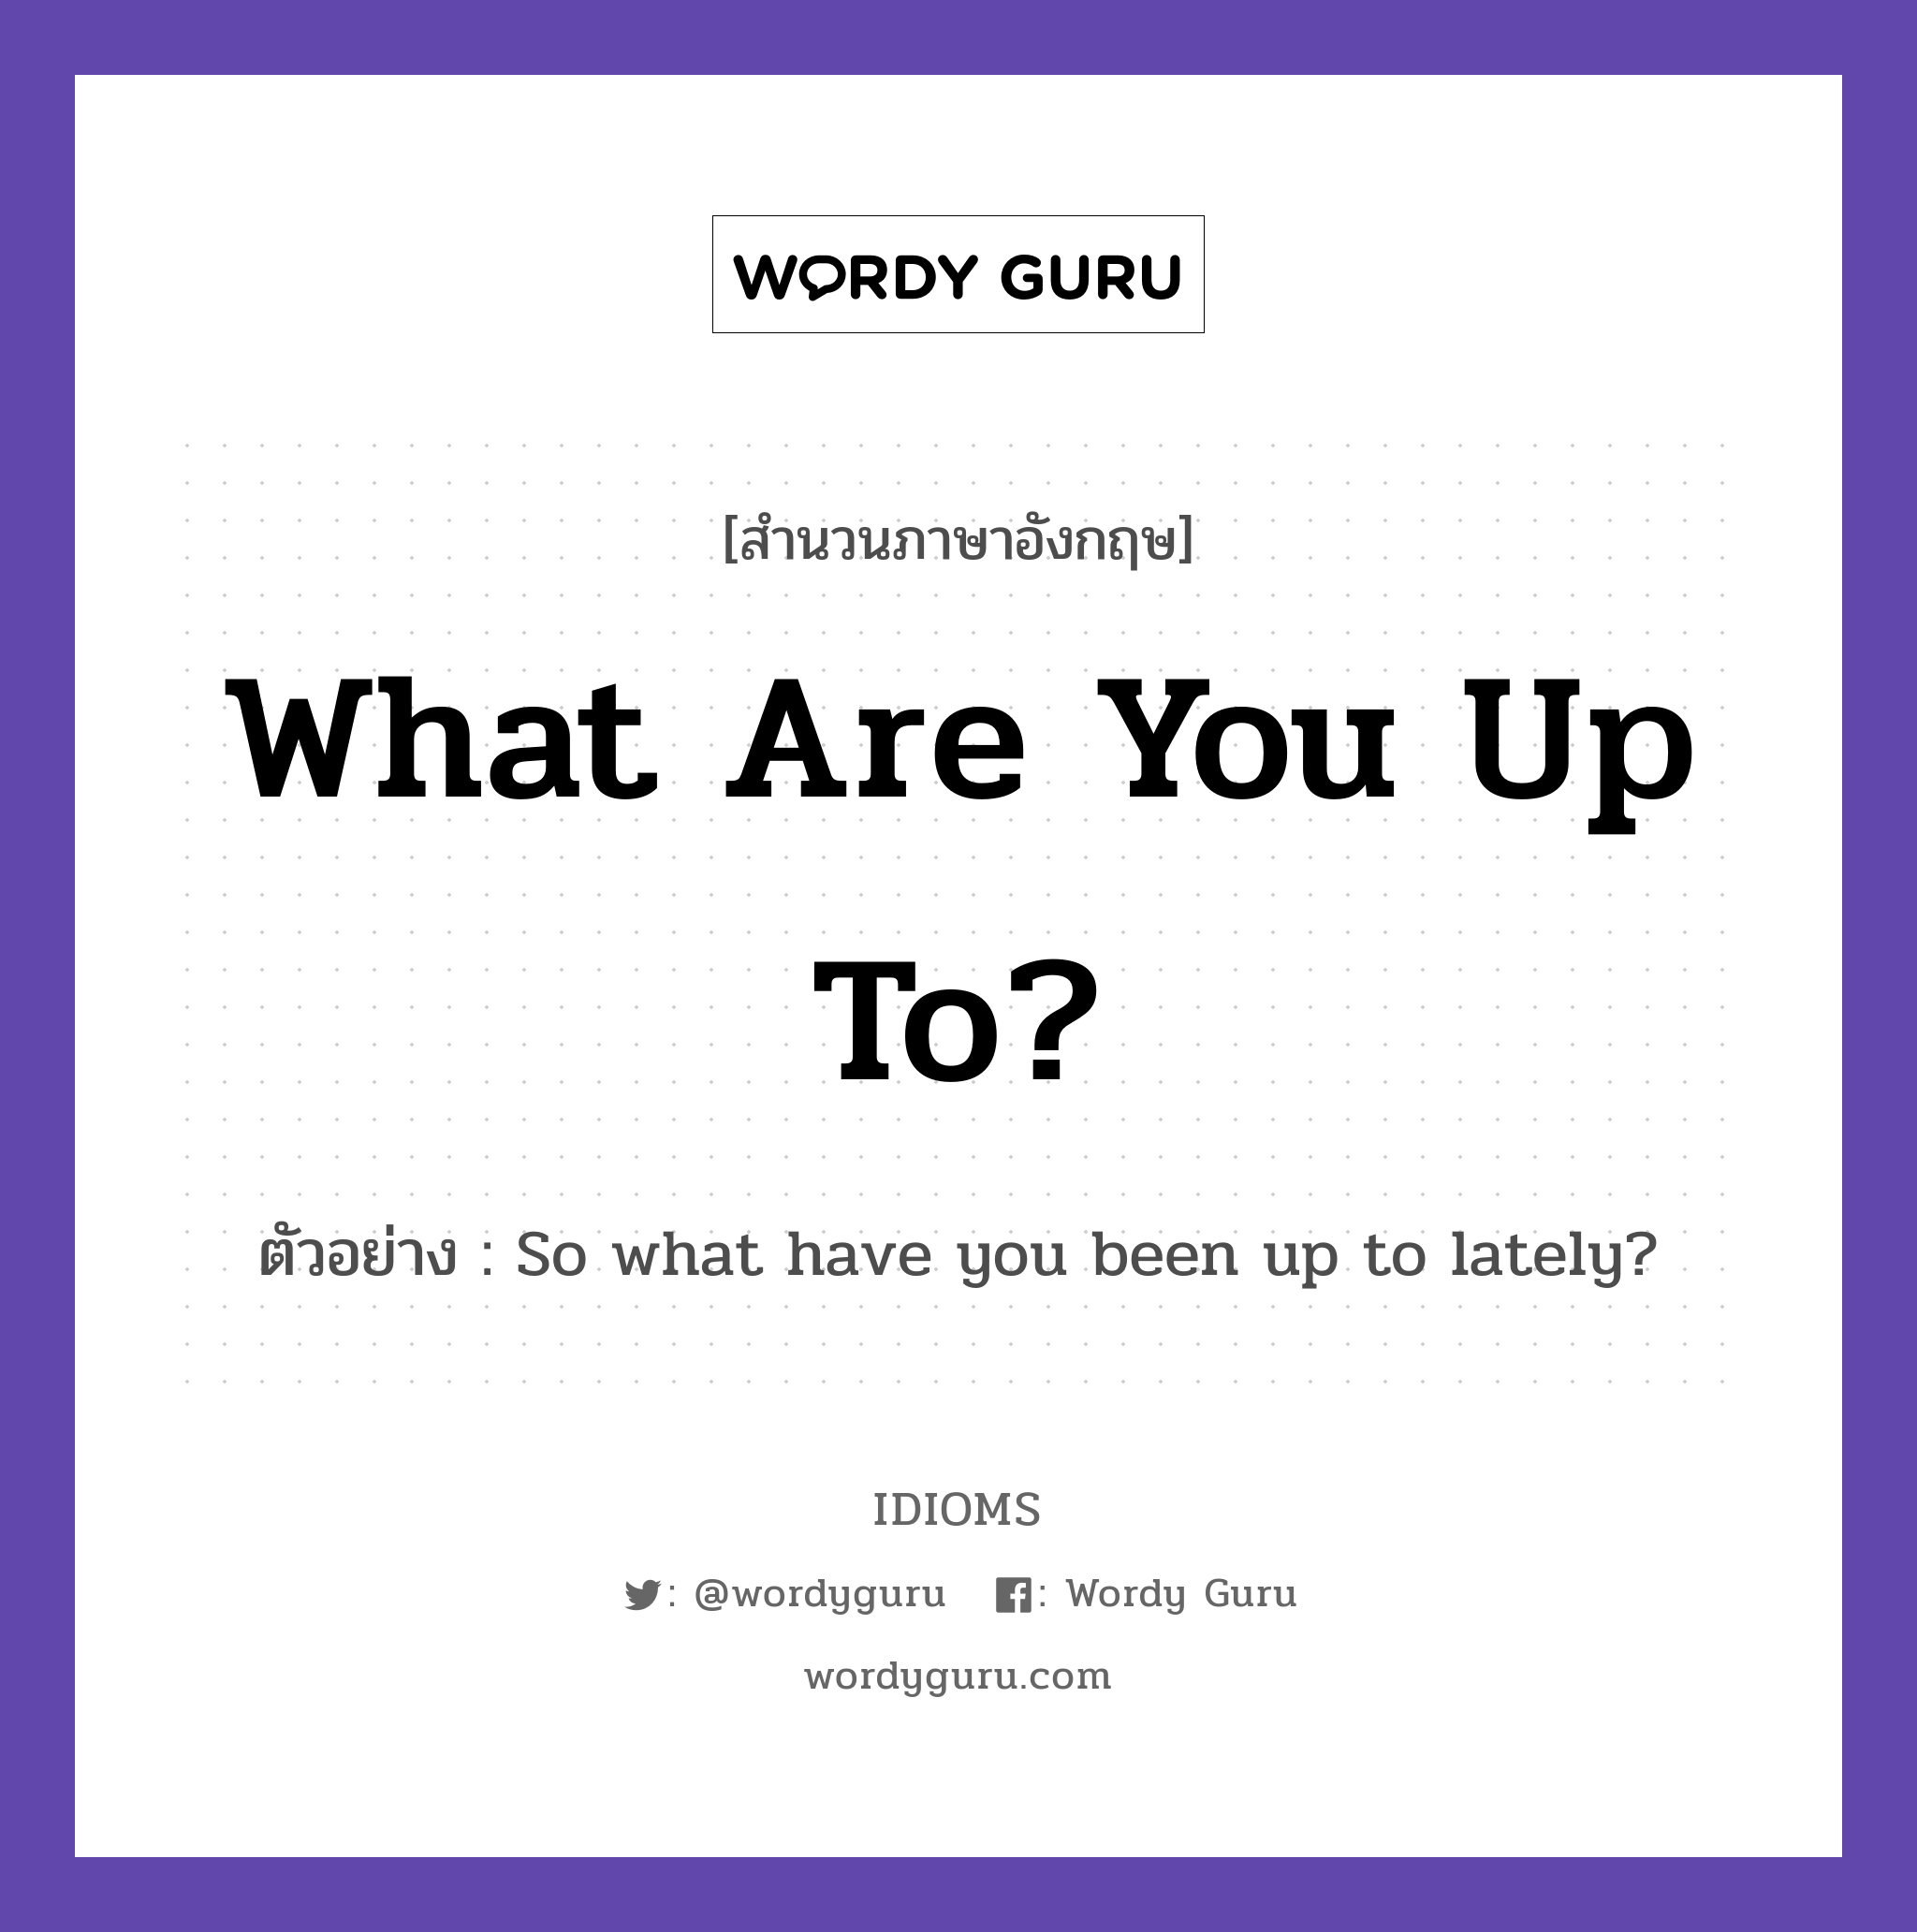 What Are You Up To? แปลว่า?, สำนวนภาษาอังกฤษ What Are You Up To? ตัวอย่าง So what have you been up to lately?